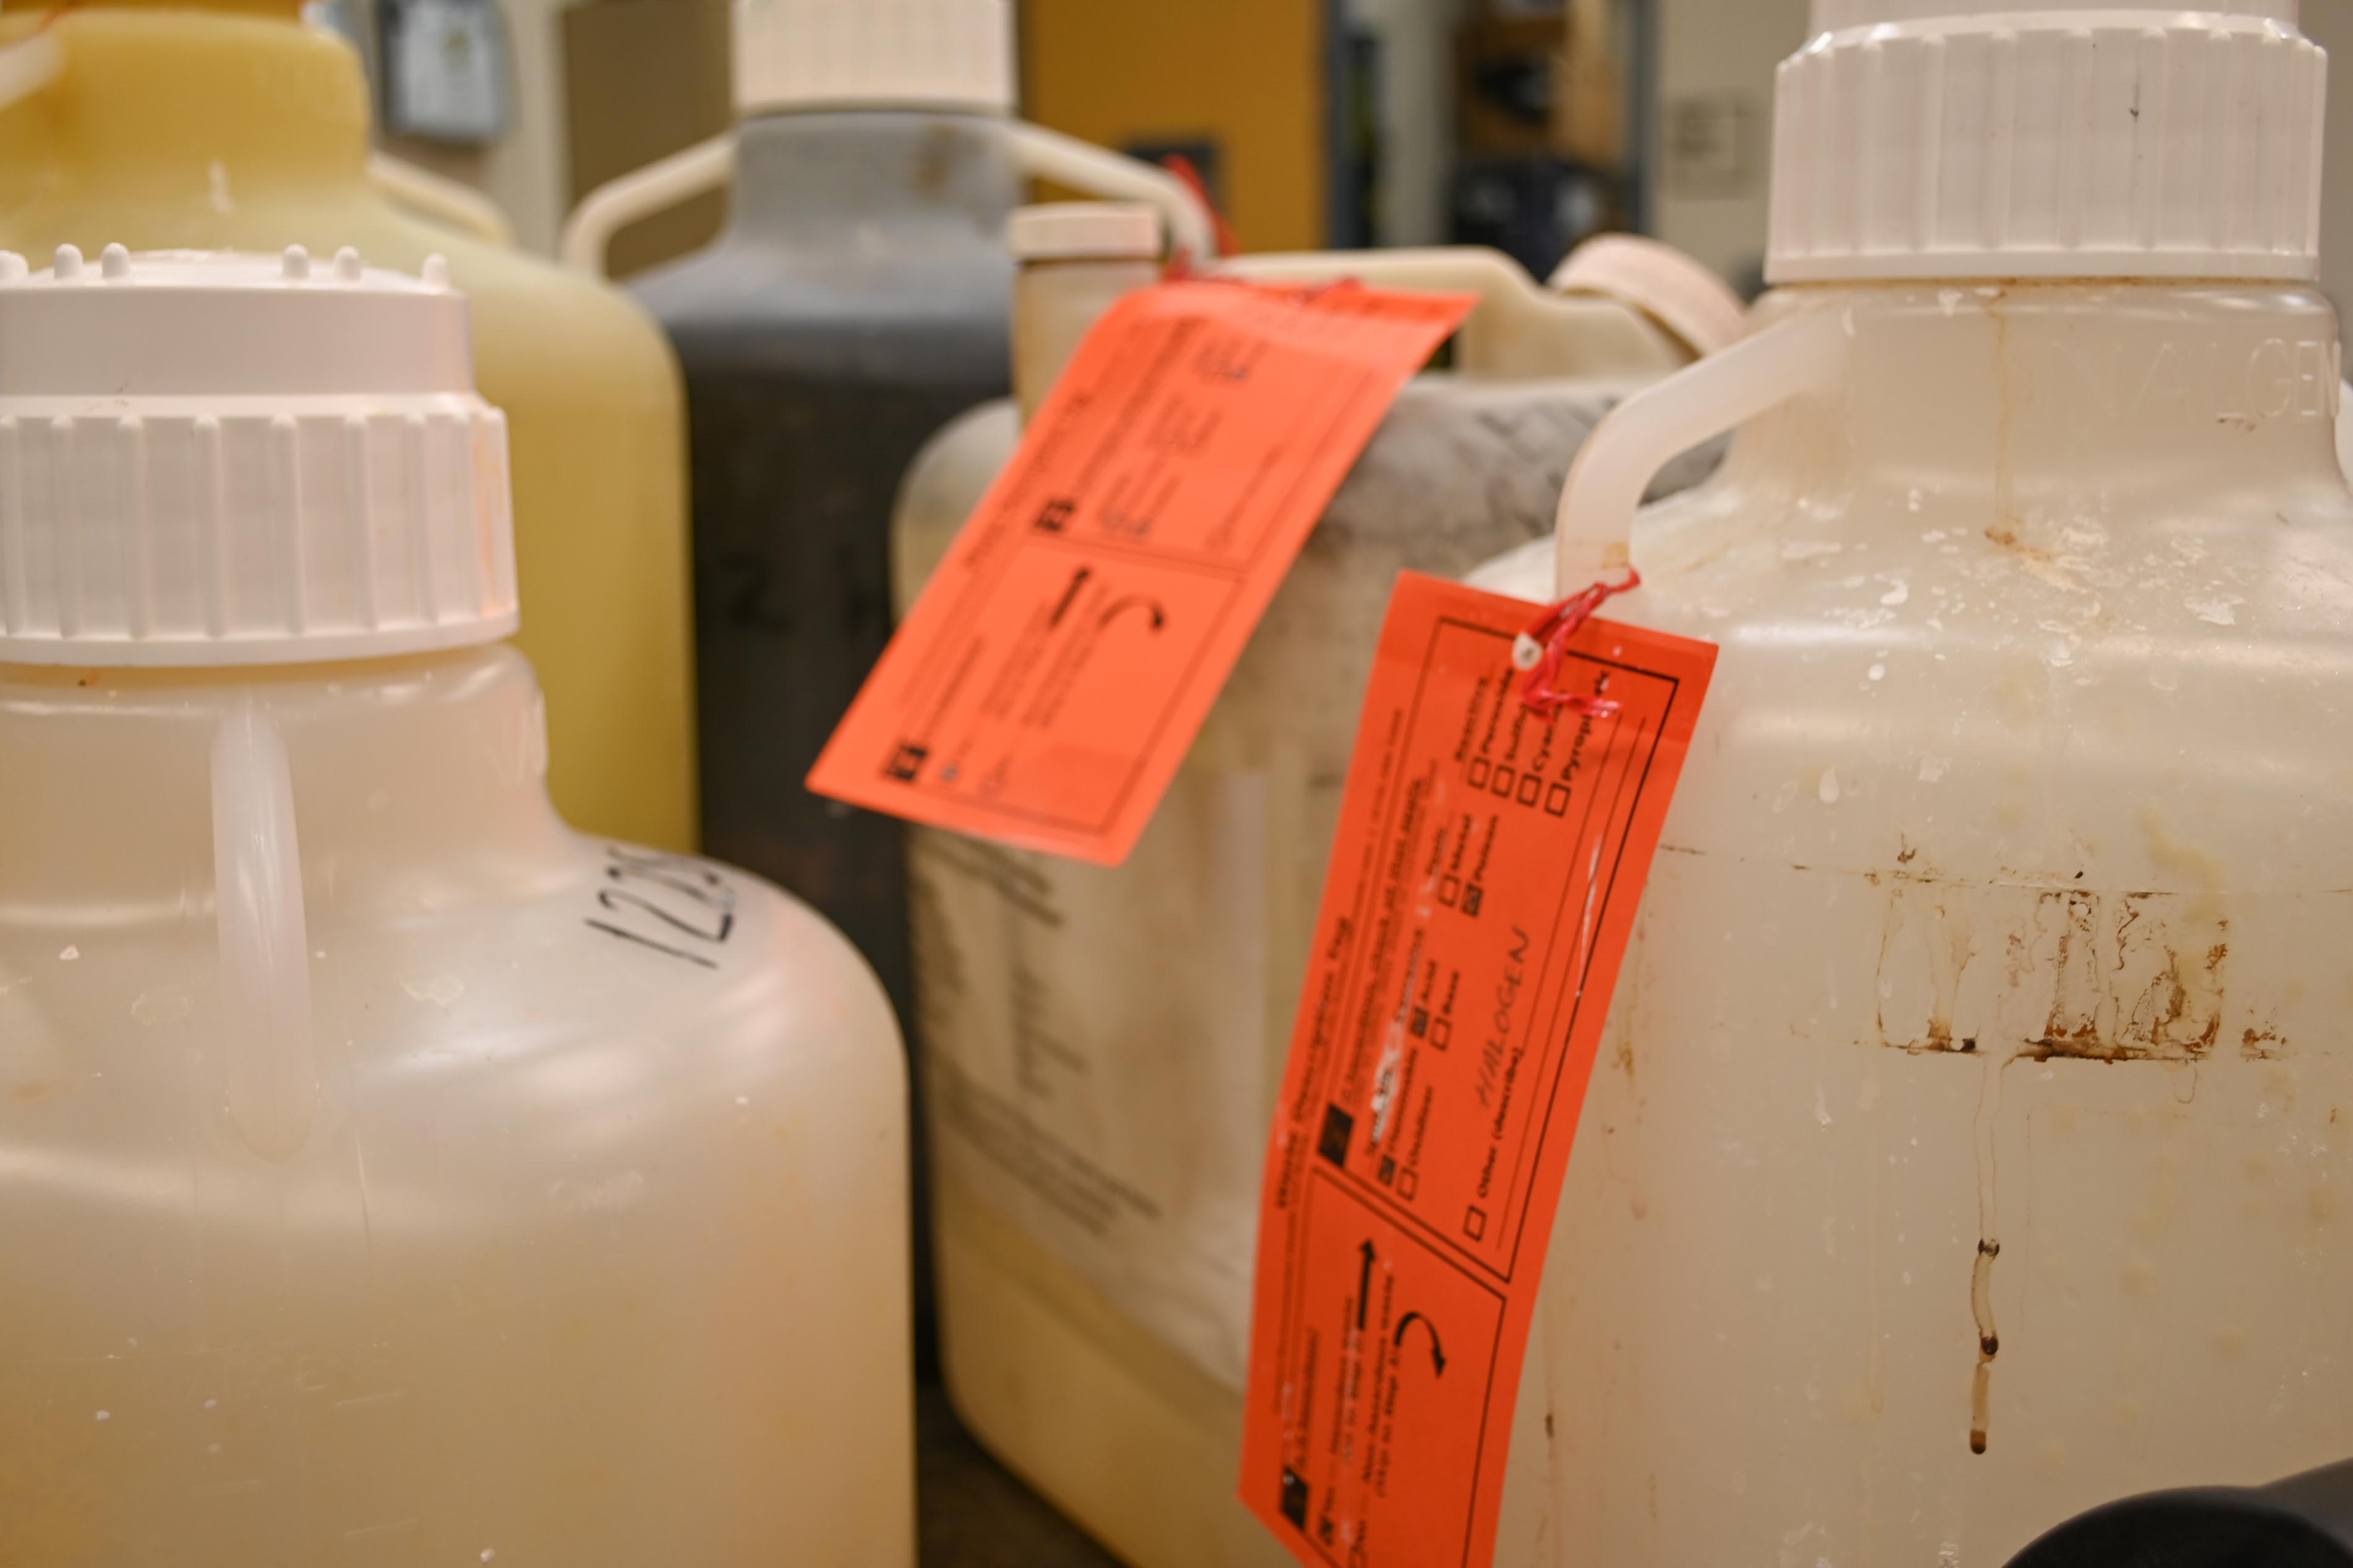 Example of orange hazardous waste tags on chemicals to be collected by EH&S